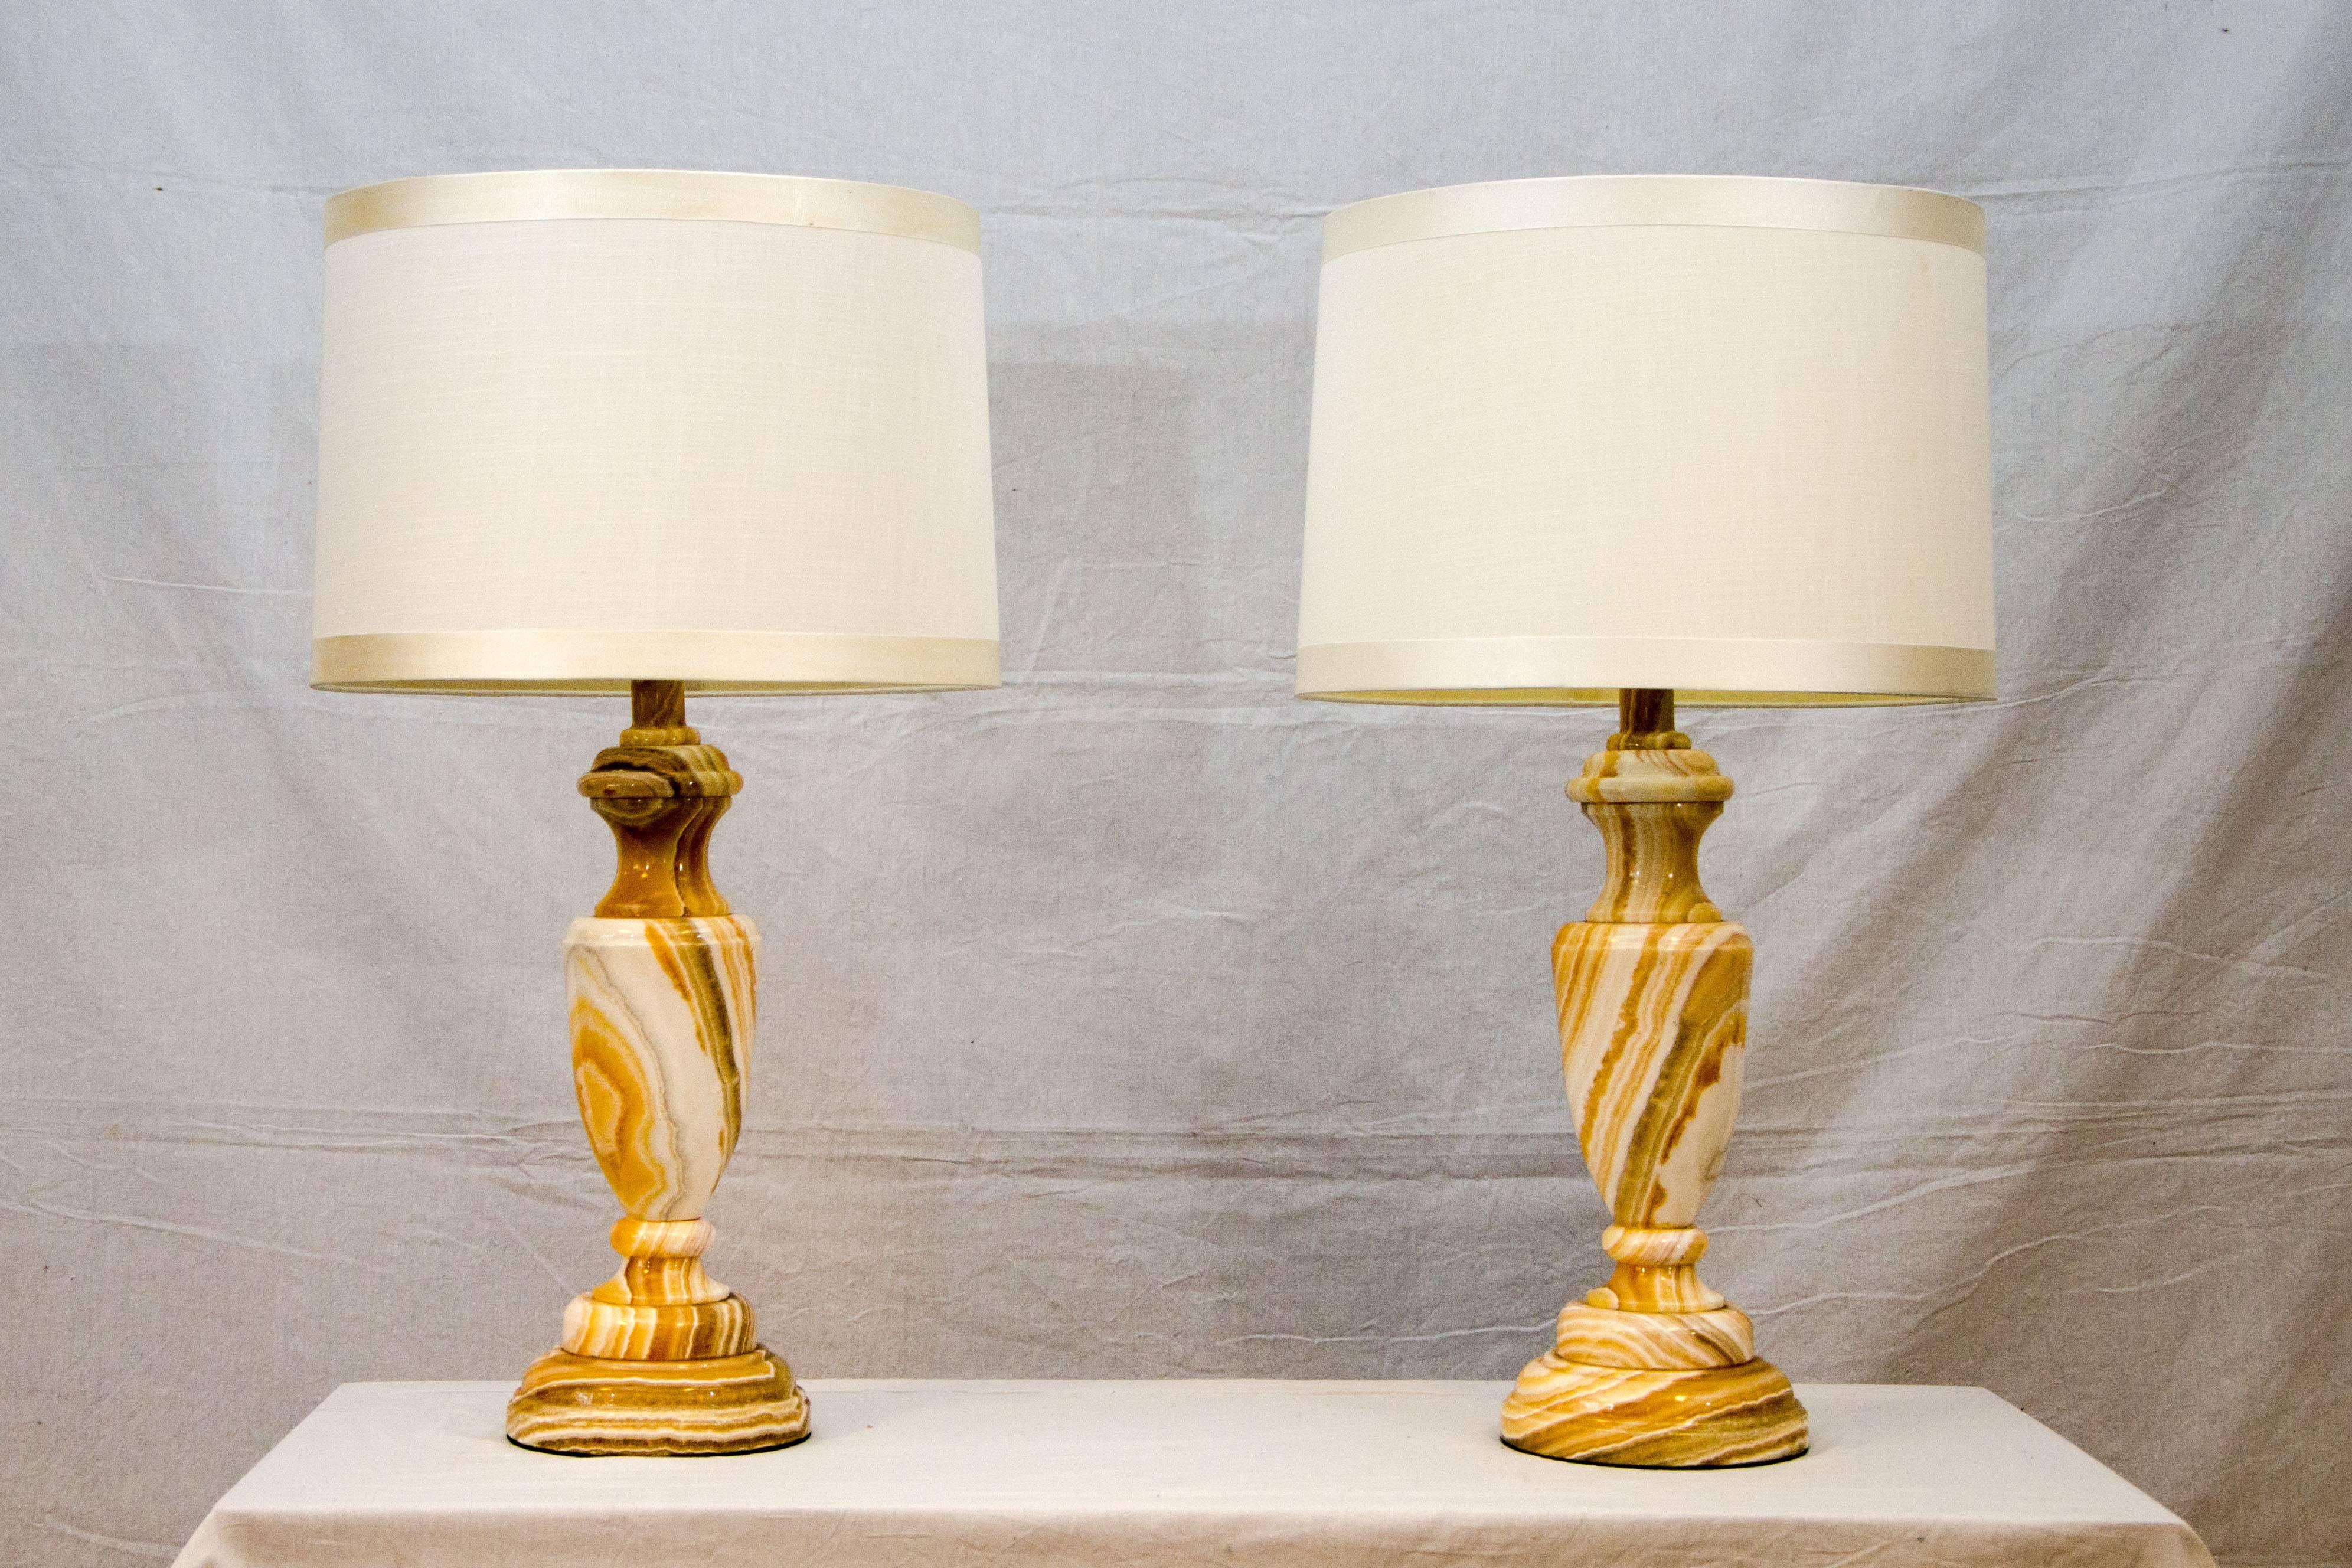 Nice pair of onyx table lamps in white and various shades of tan as well as grey. The on/off knobs resembles a key. The onyx bases are 19" high. They are heavy and very stable.